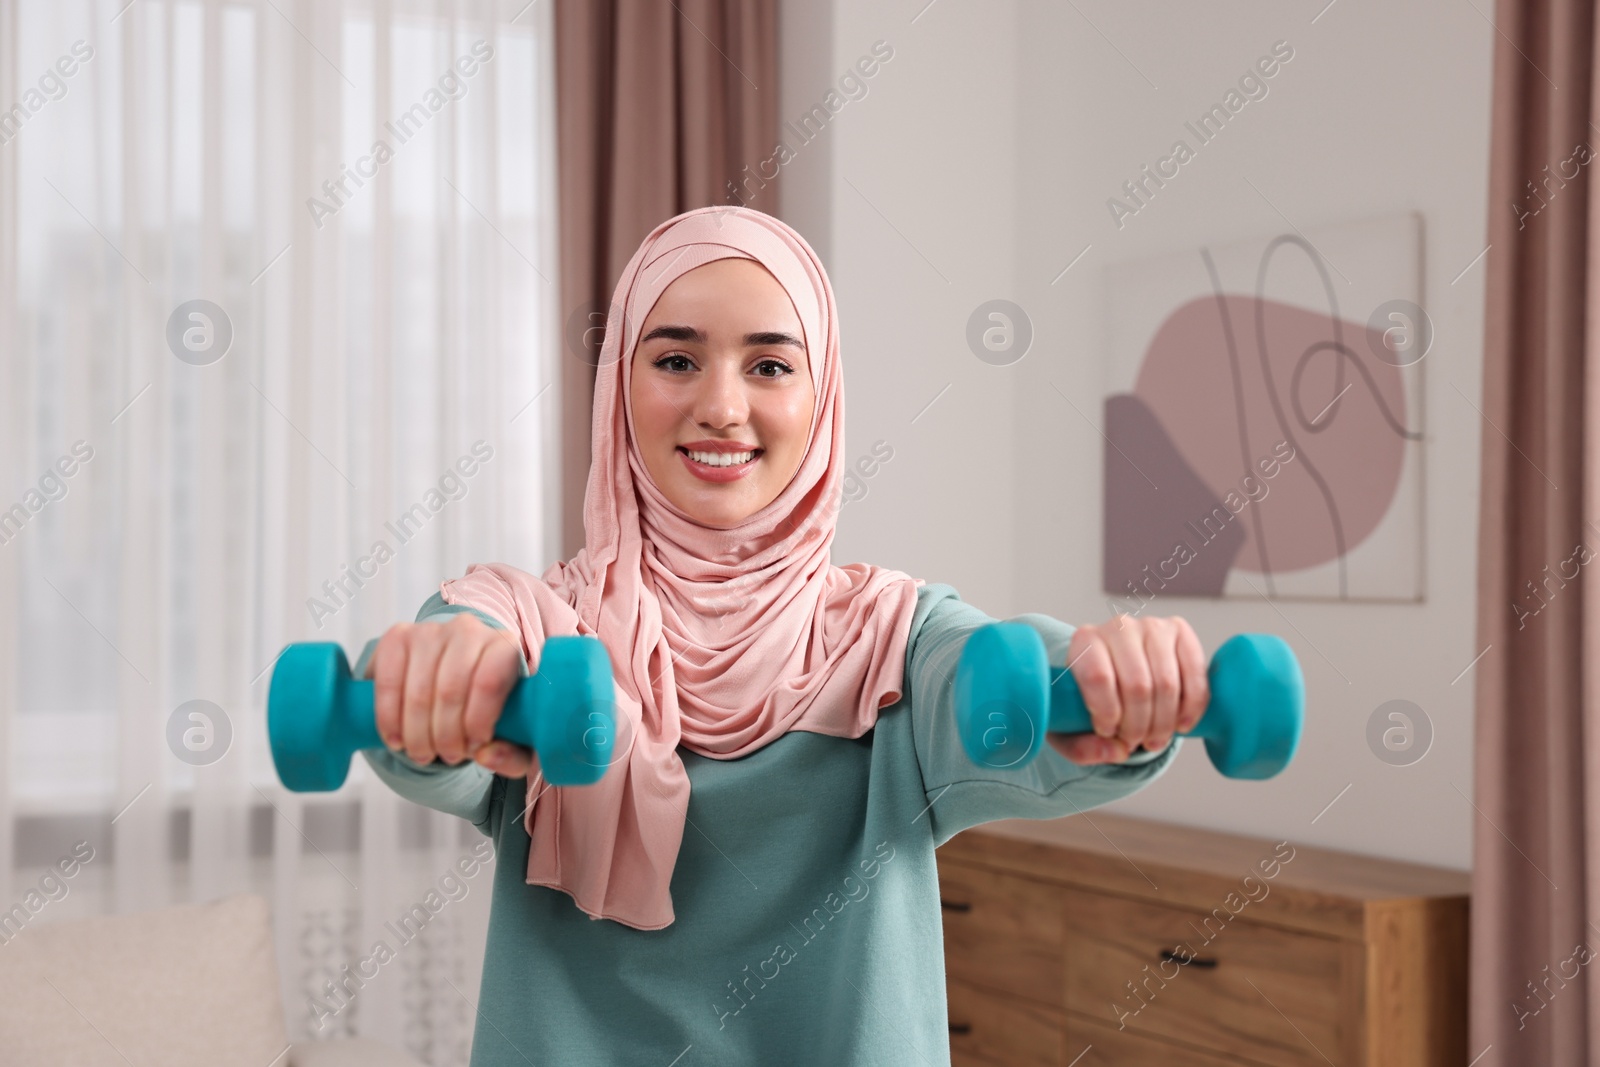 Photo of Muslim woman in hijab doing exercise with dumbbells at home